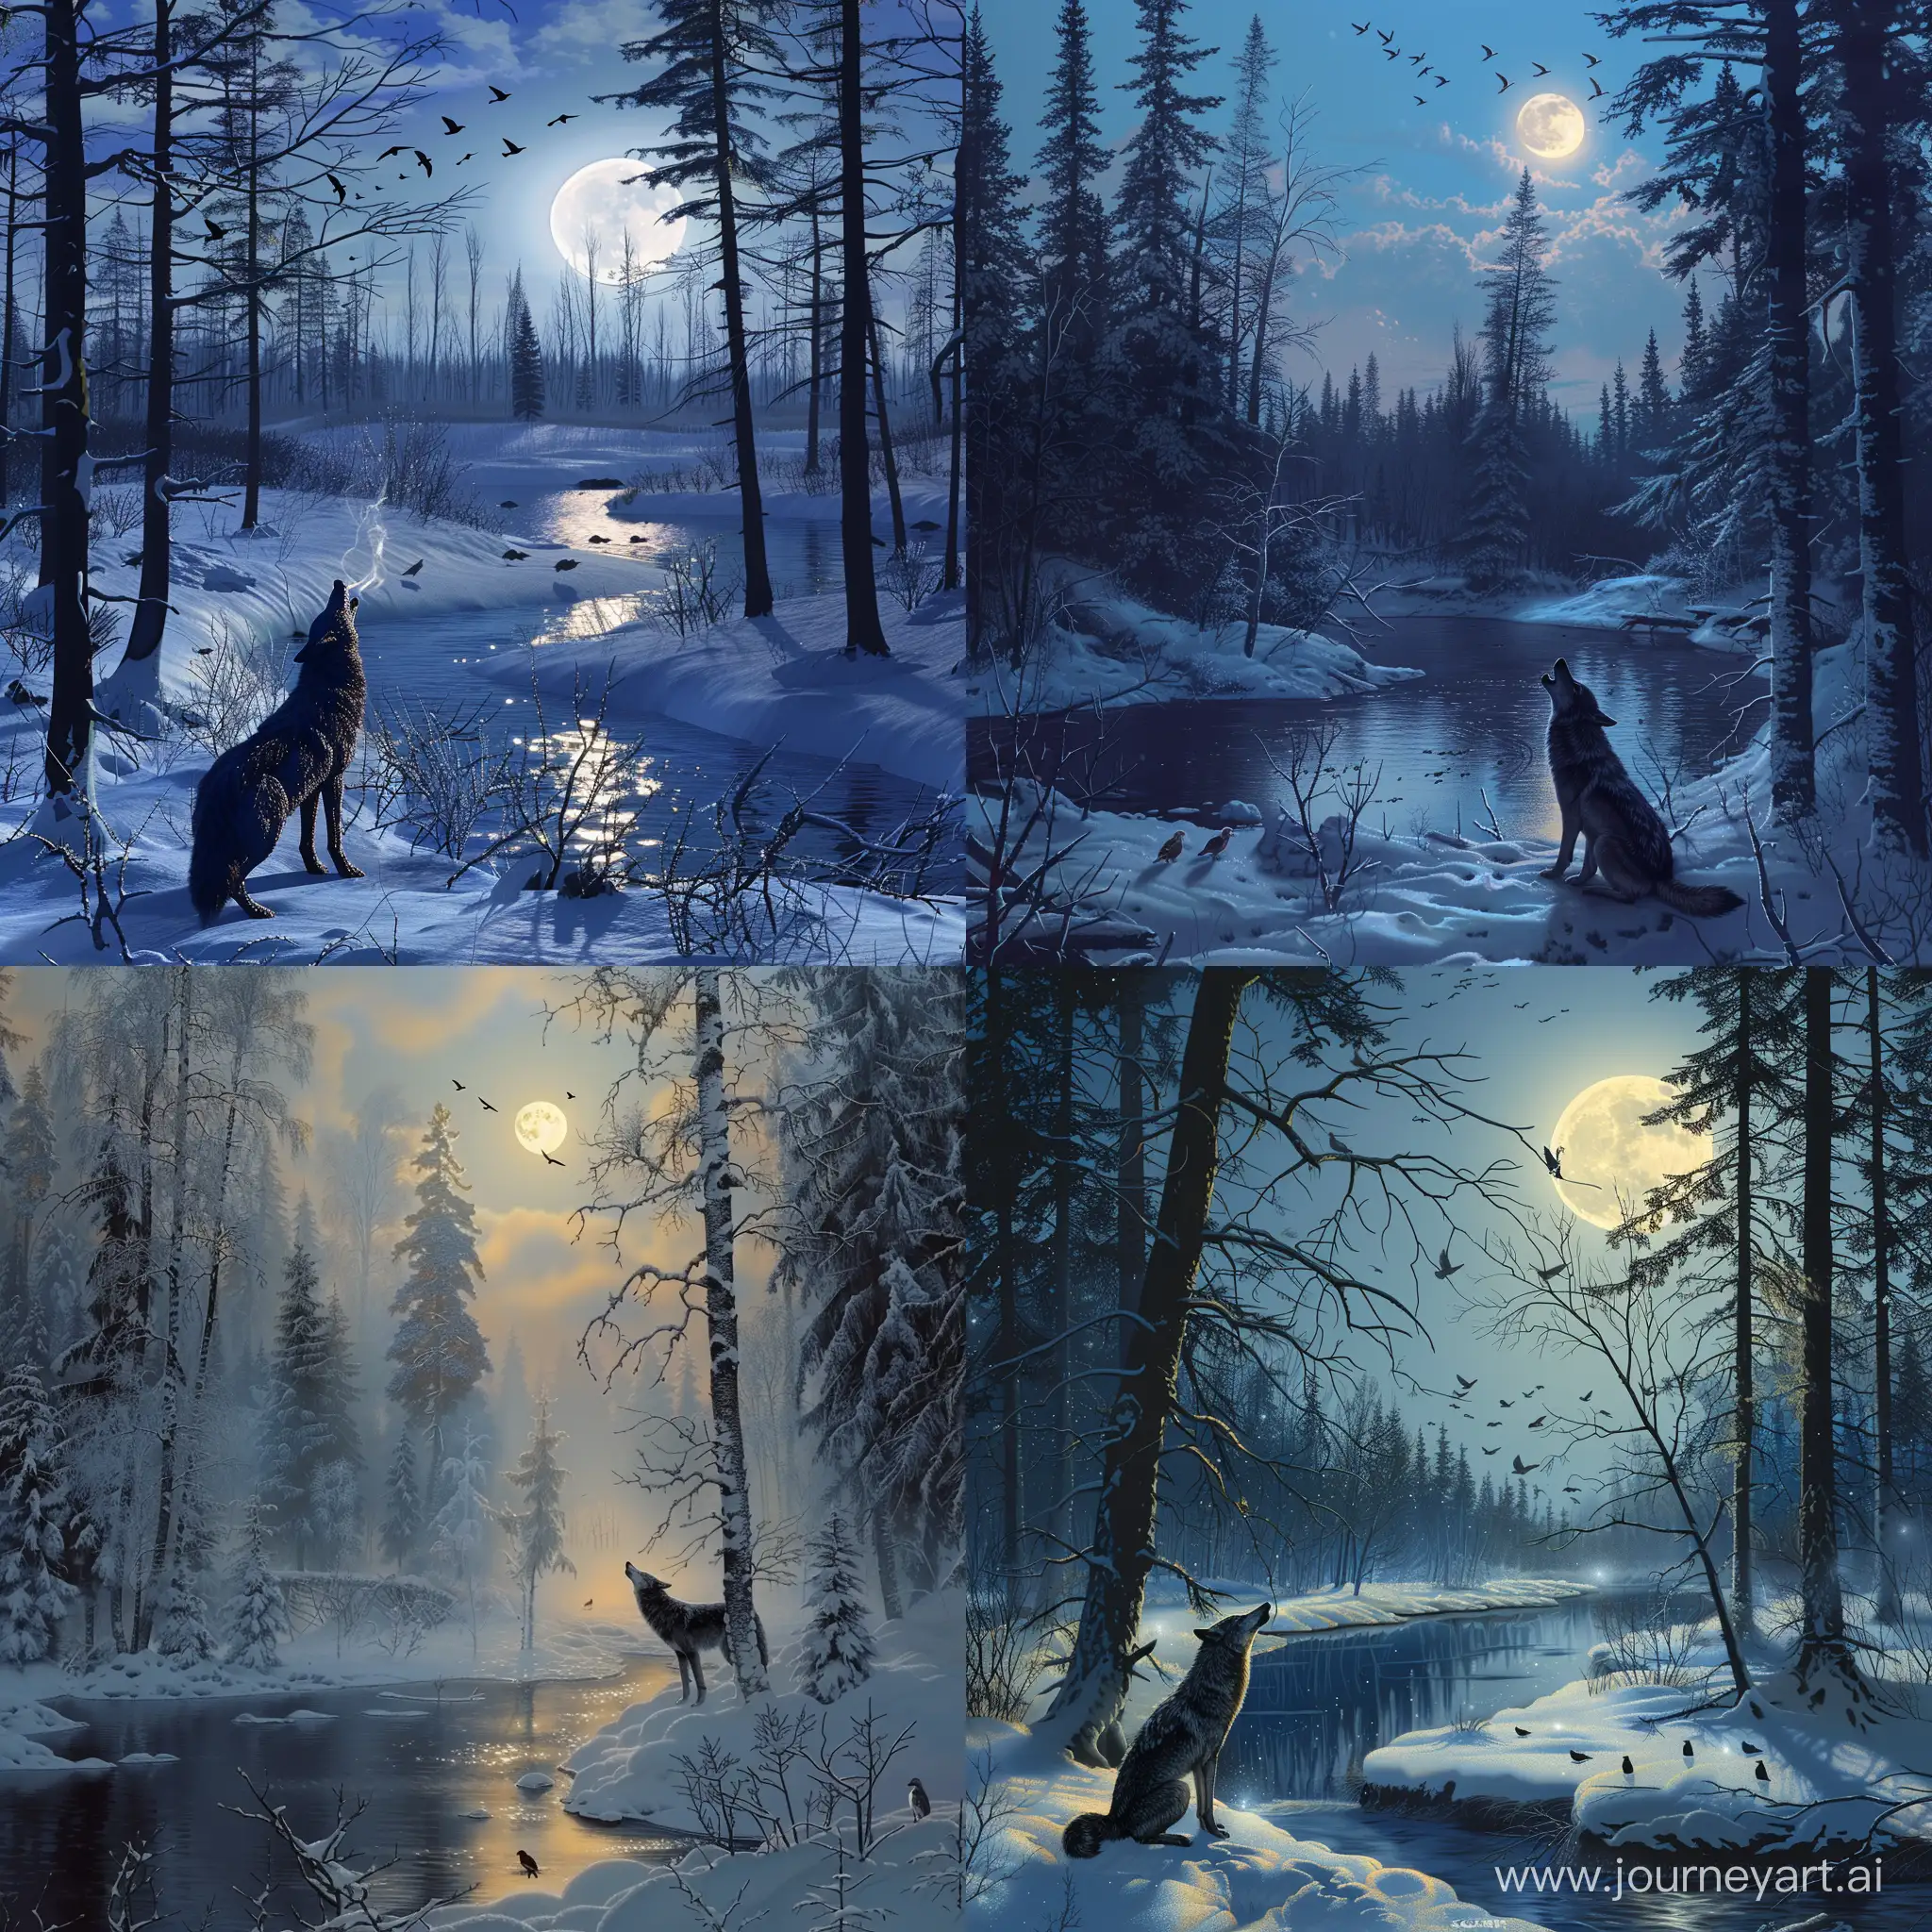 lonely forest, a lone wolf howls at the bright moon, Siberian night, taiga, winter, river, birds, HD size 1920 by 1080 --v 6 --ar 1:1 --no 83236